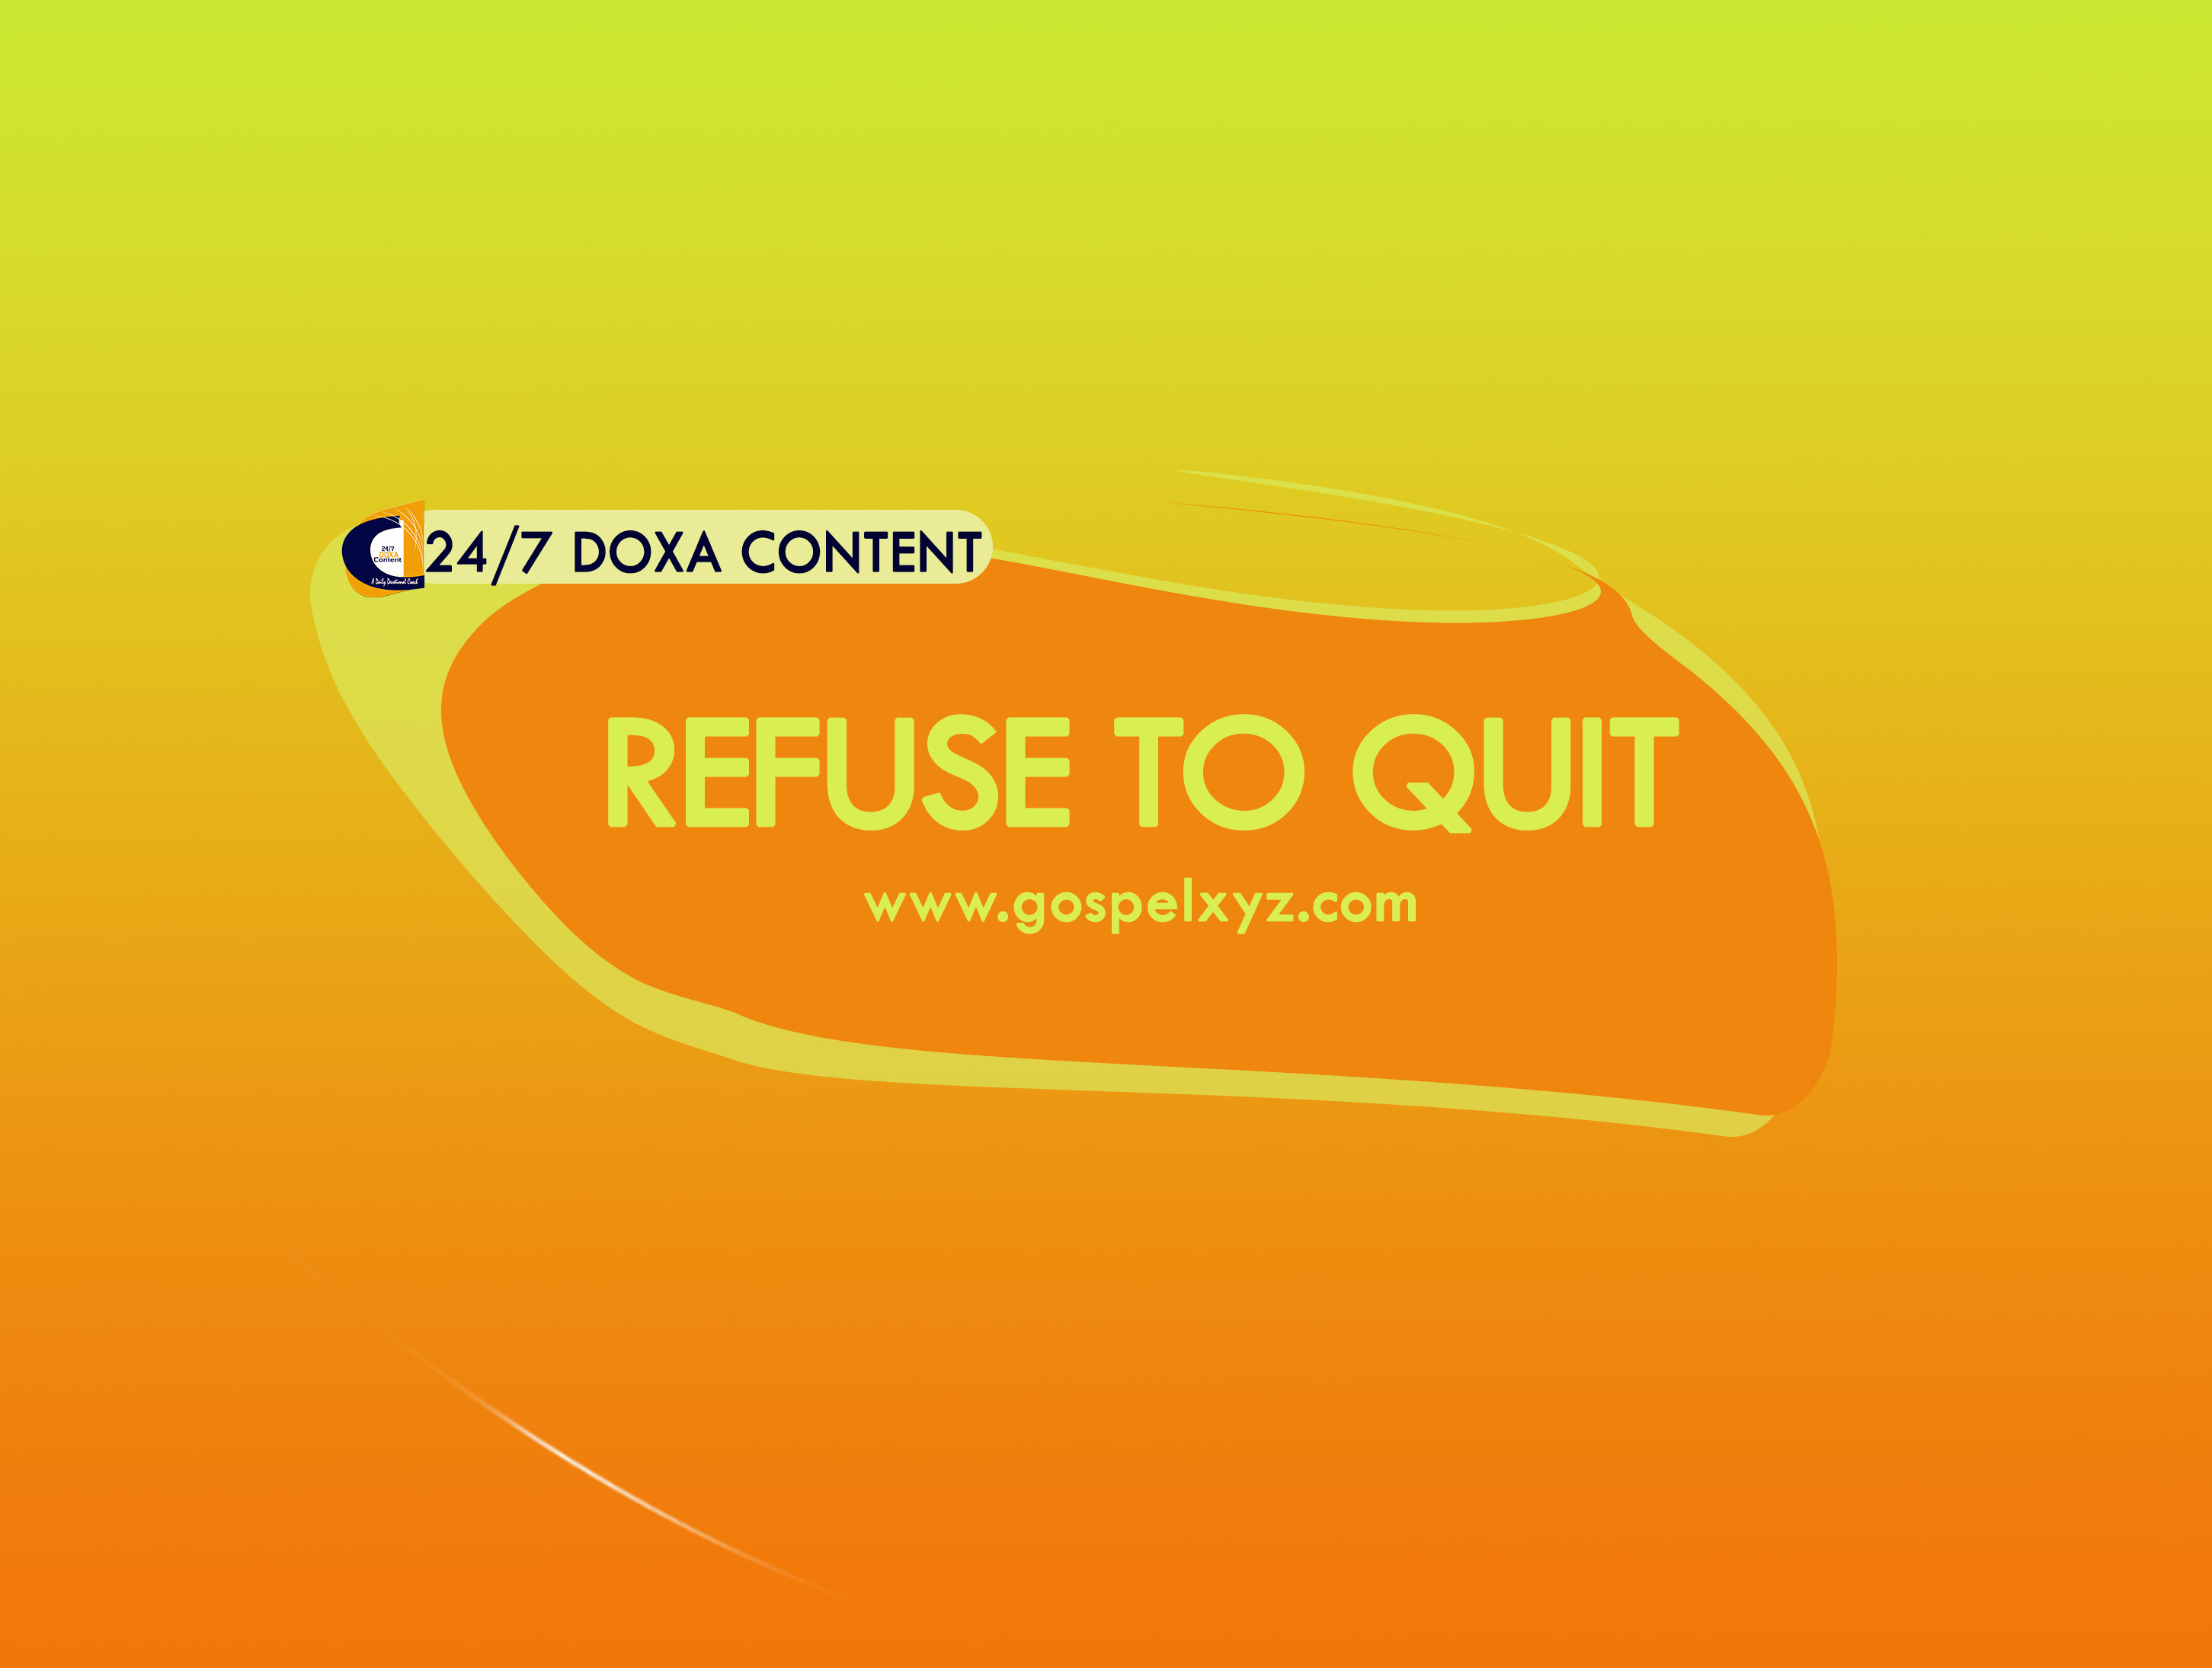 24/7 DOXA Content 2019 SATURDAY, 22nd June- REFUSE TO QUIT